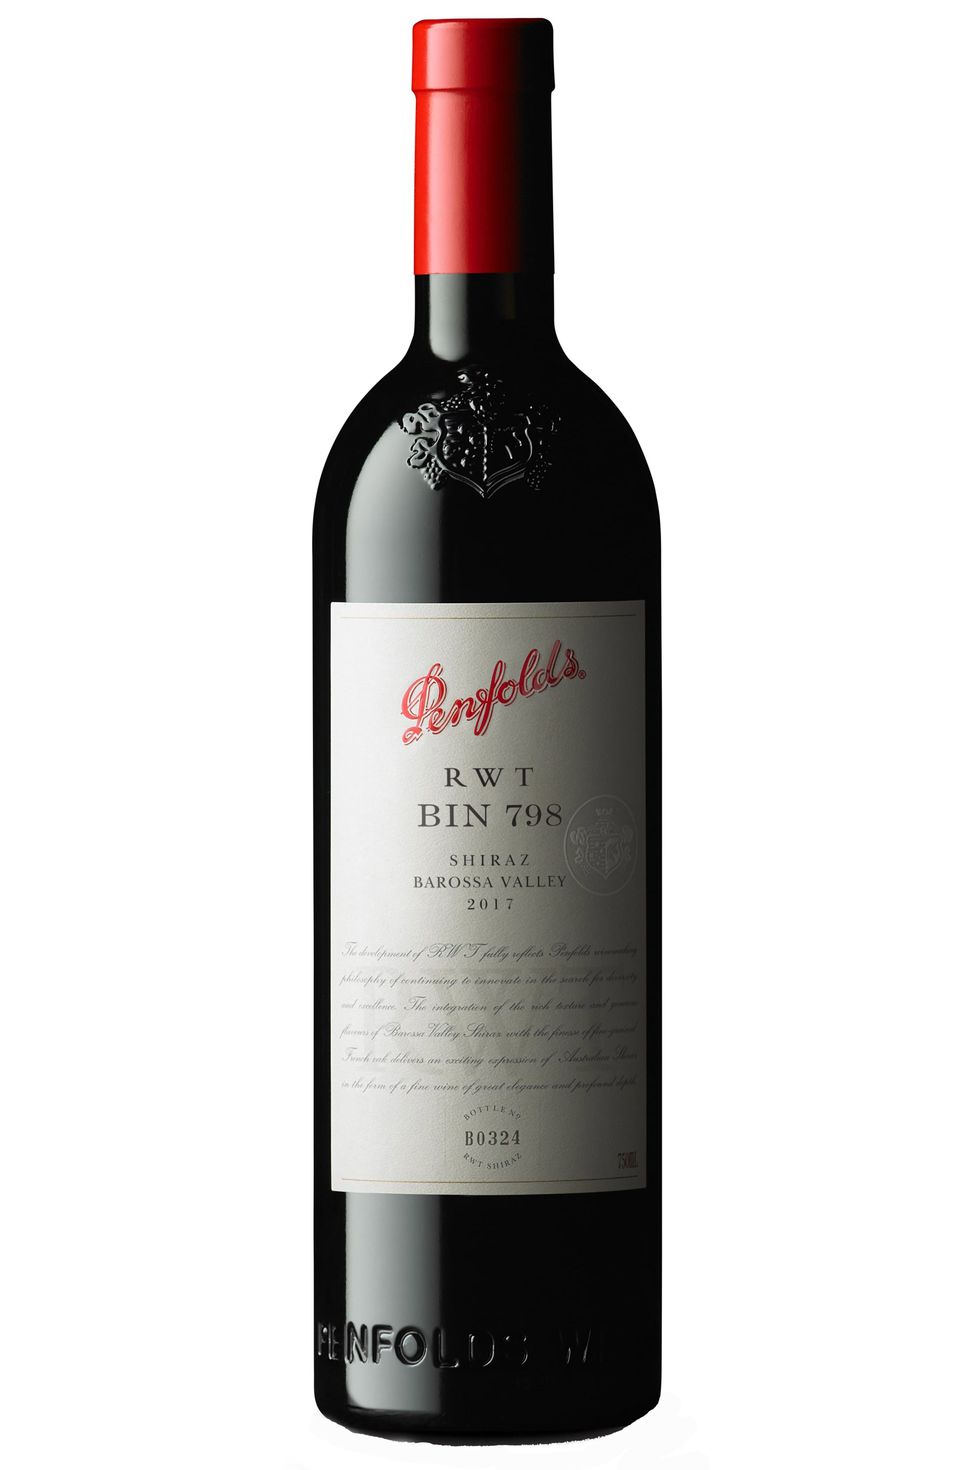 12 Best Red Wines To Drink - Top Wine Bottles to Try